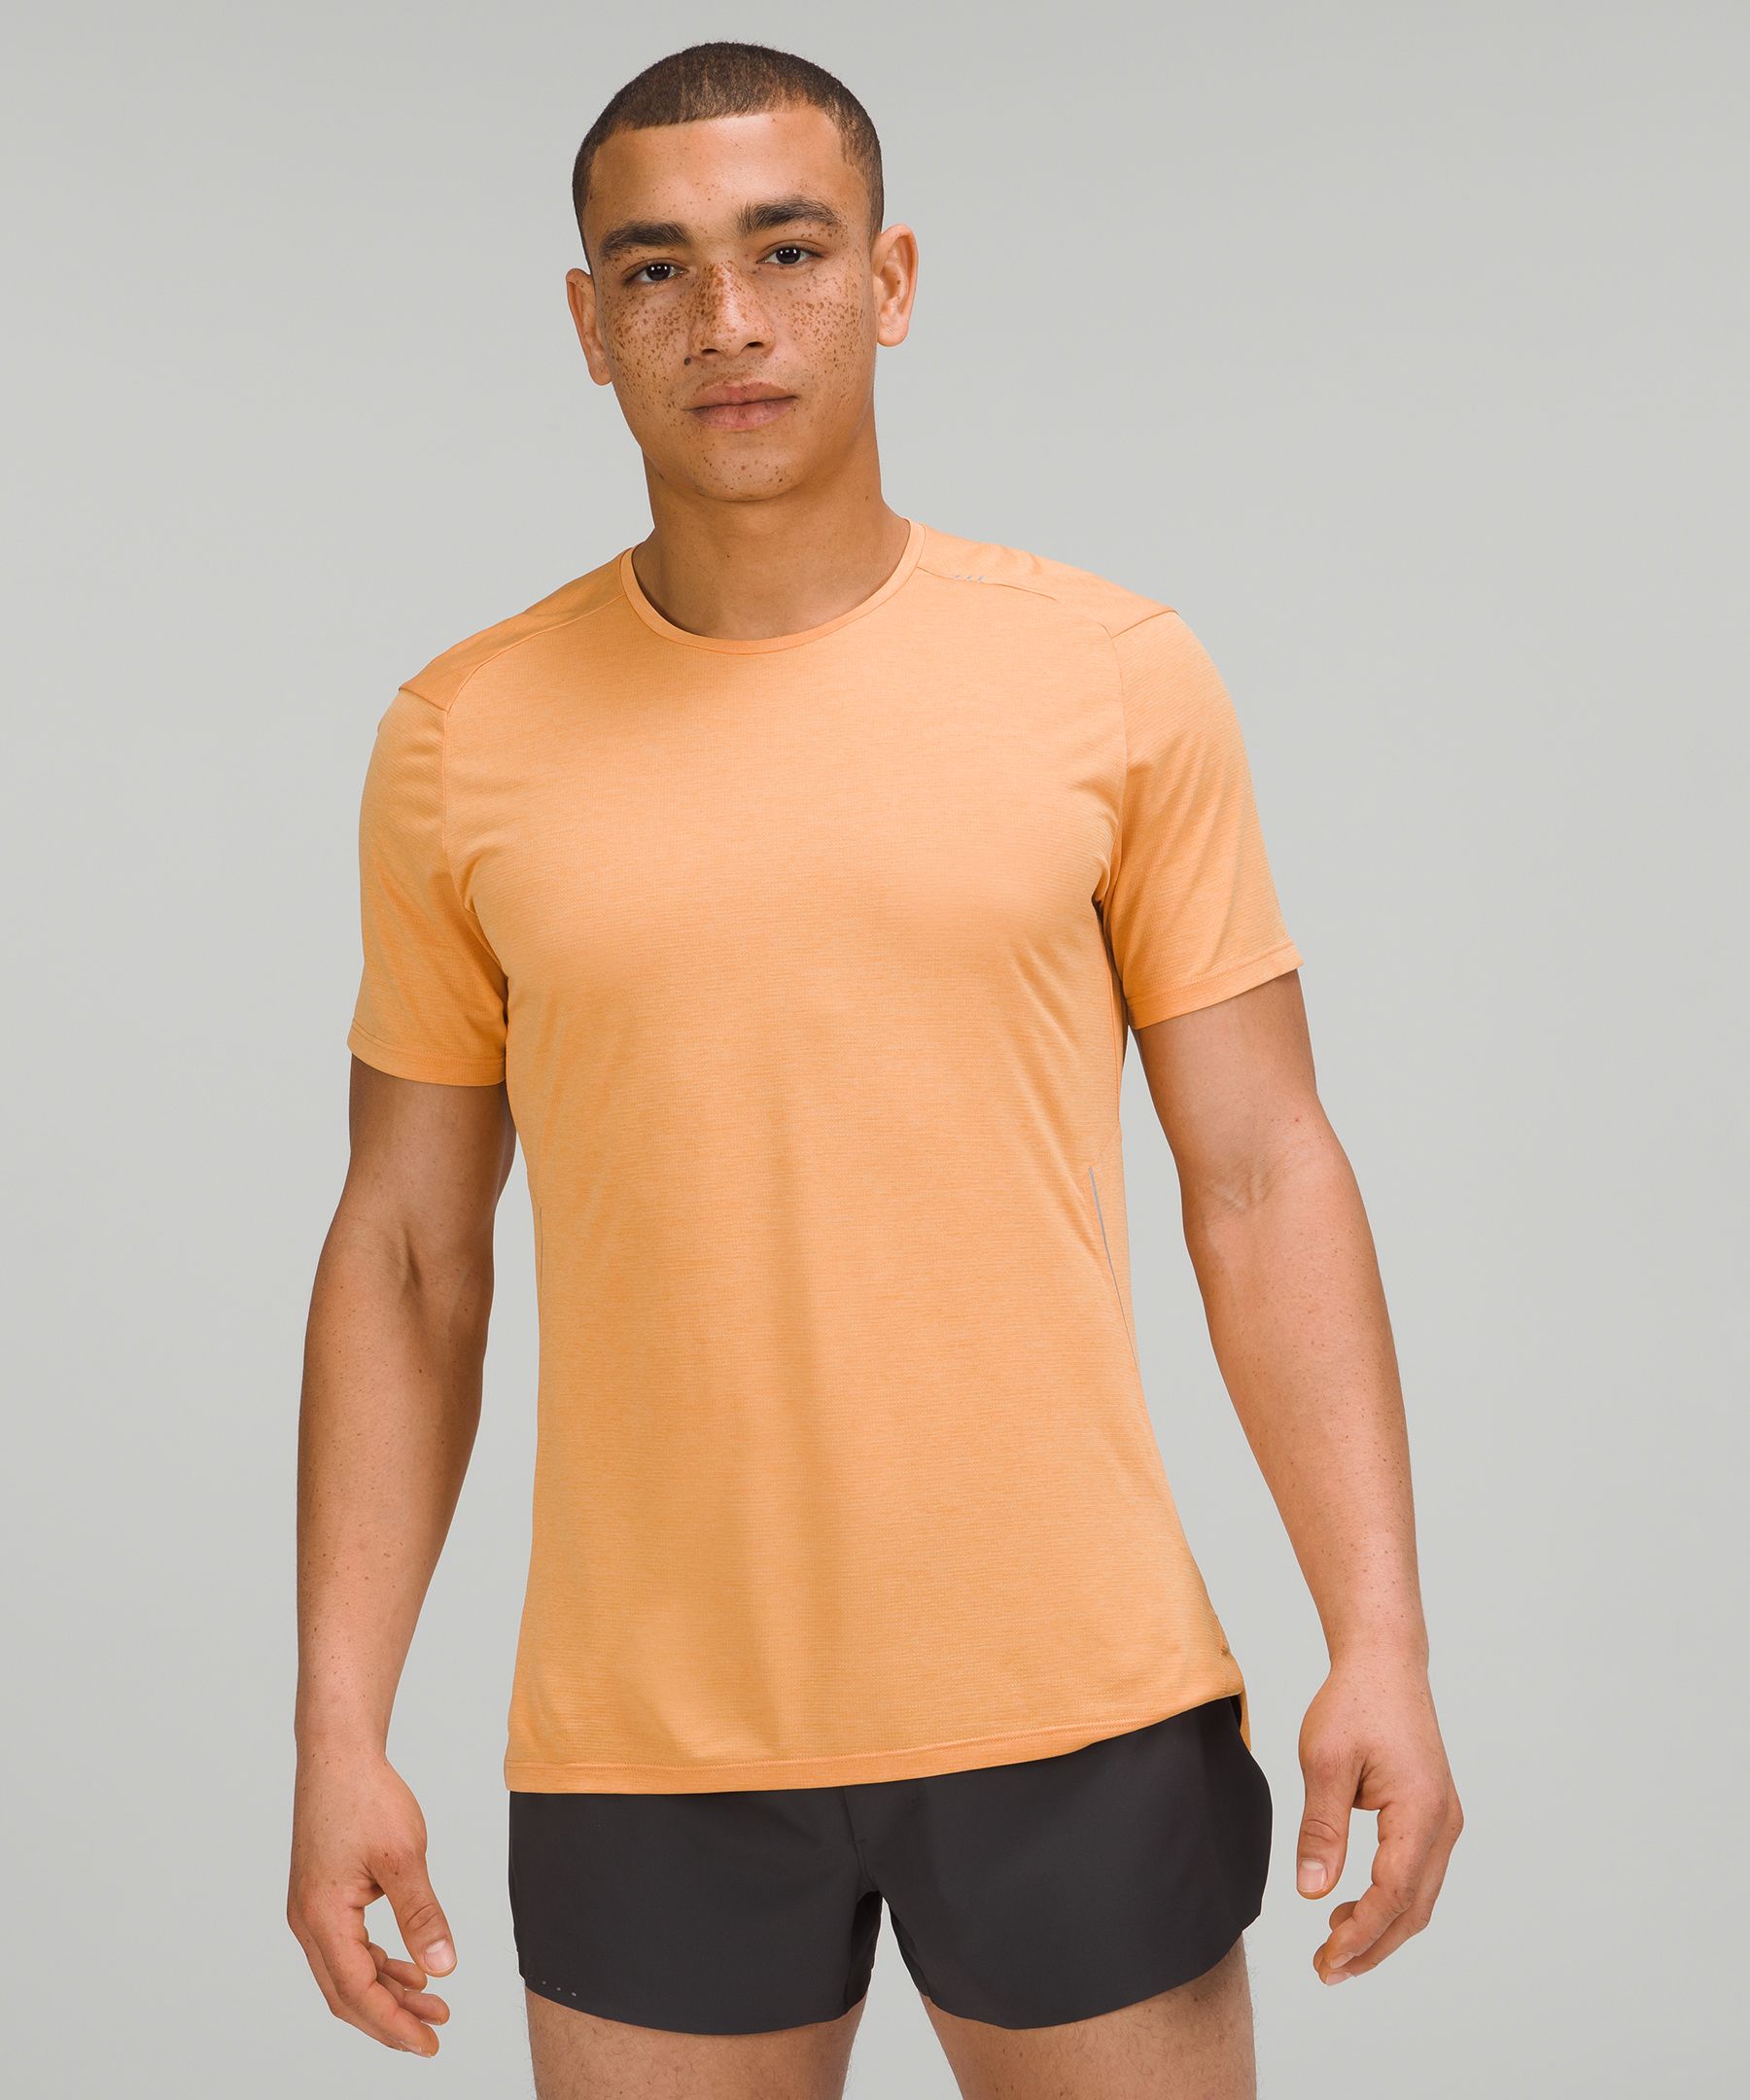 Lululemon Fast And Free Short Sleeve Shirt In Heathered Warm Apricot